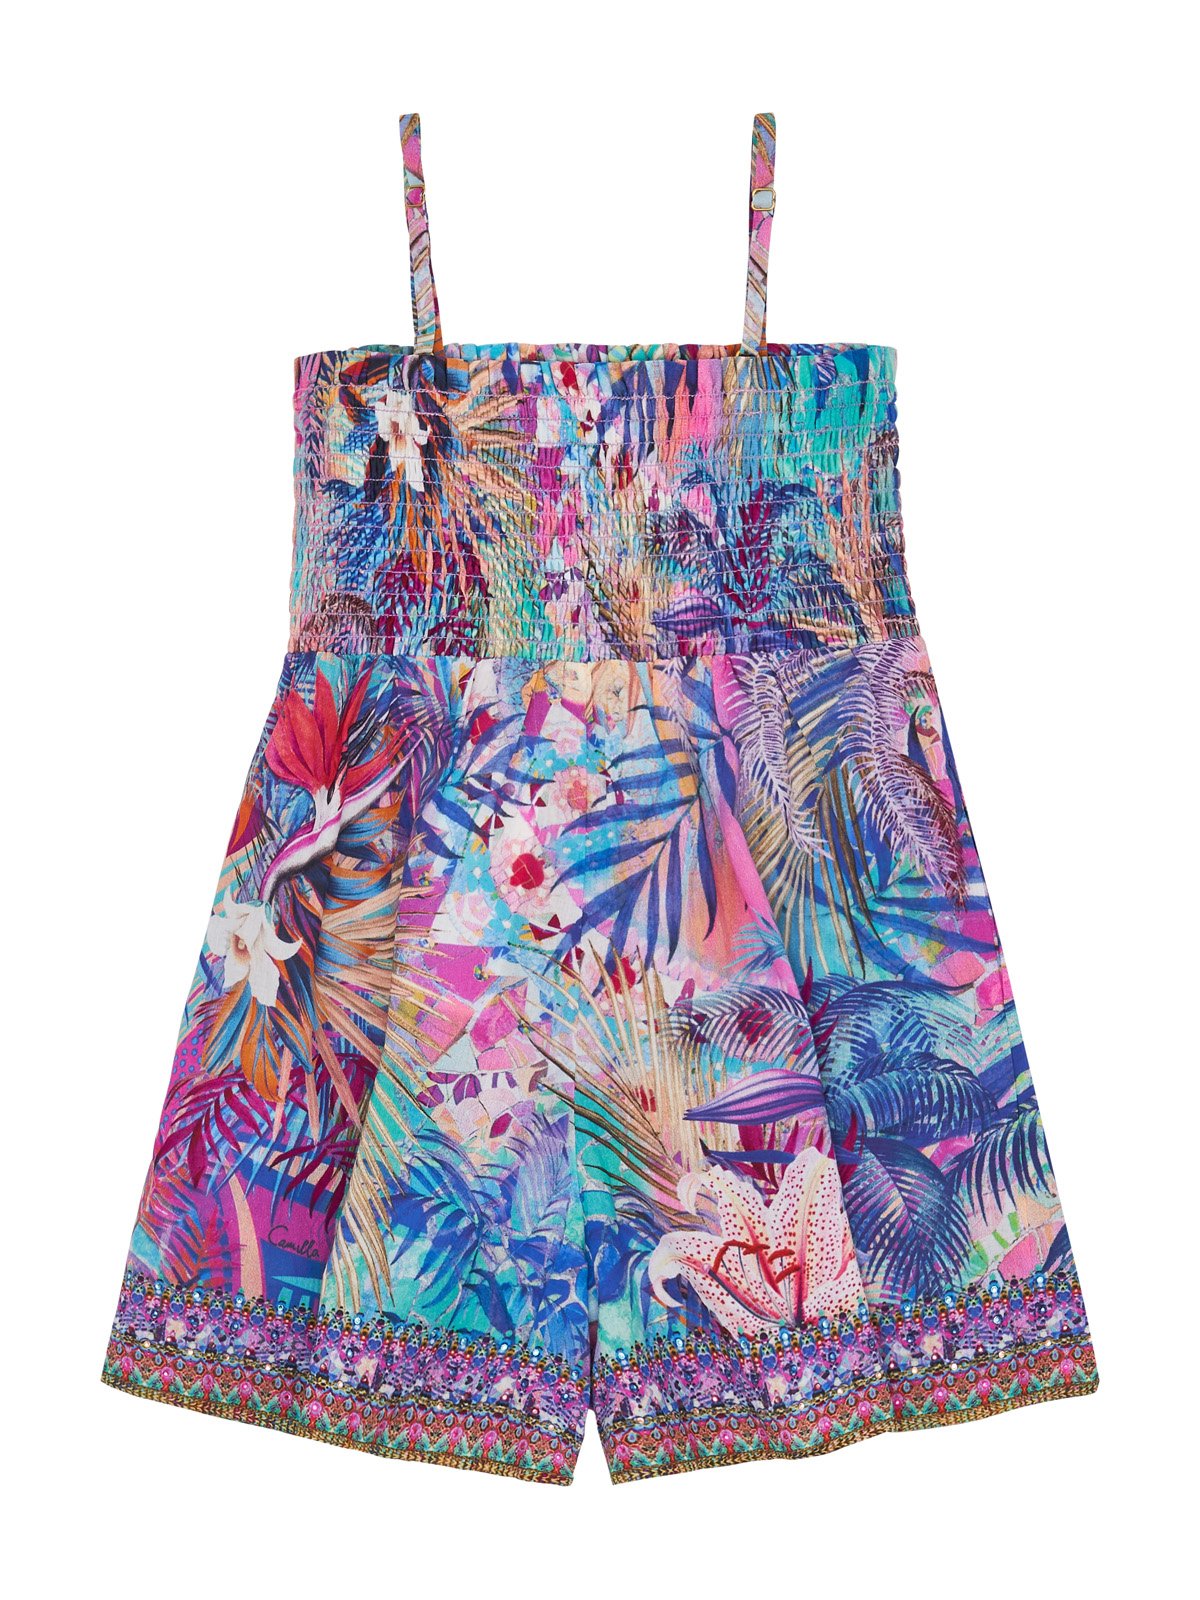 KIDS PLAYSUIT WITH SHIRRING 12-14 SOUTH BEACH SUNRISE